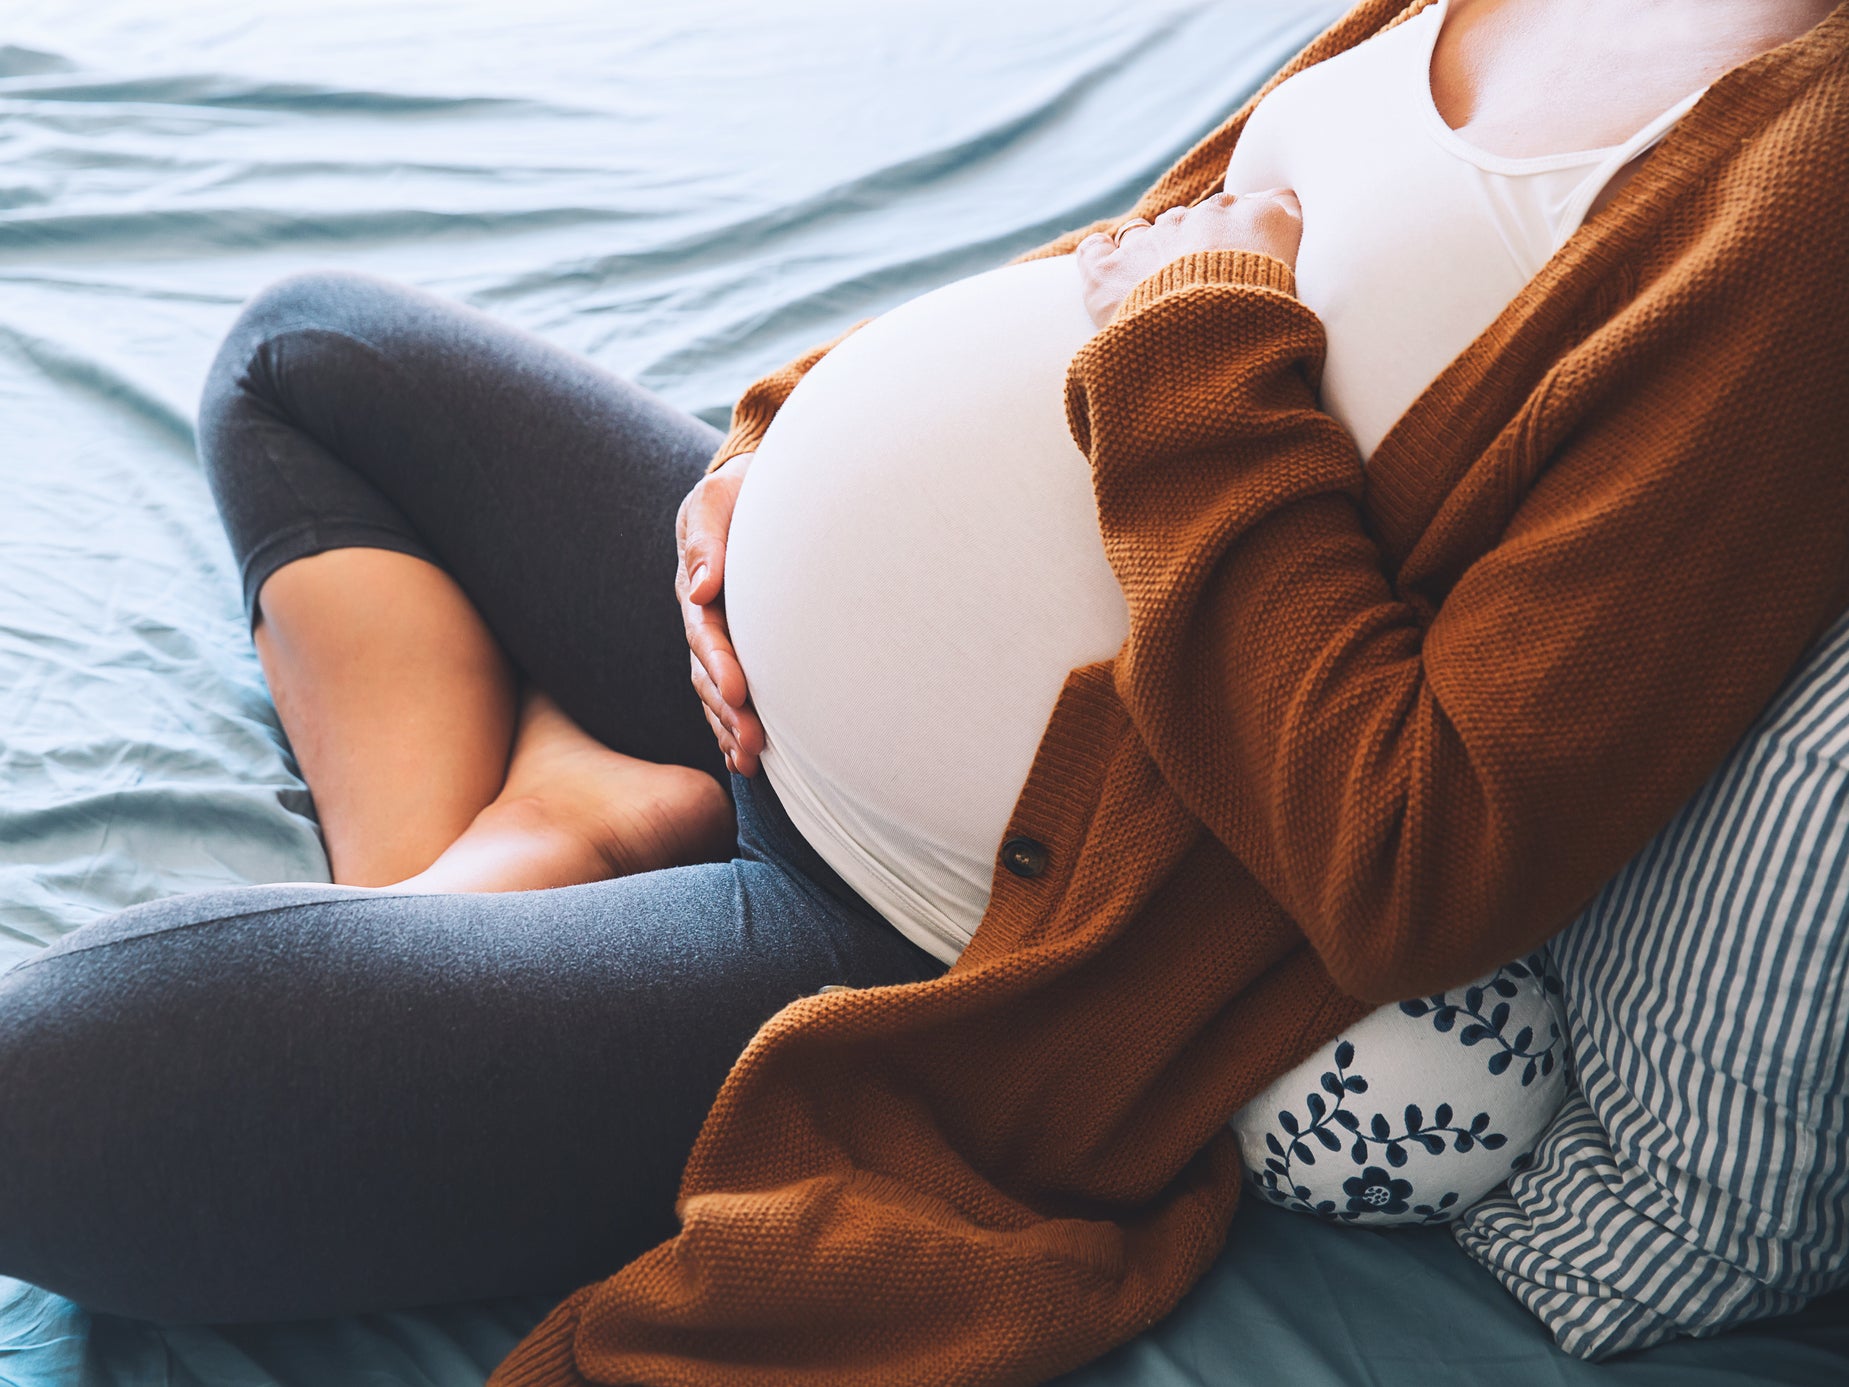 The piece of legislation seeks to prohibit redundancy during pregnancy and maternity leave and for six months after the end of the pregnancy or leave apart from in specified circumstances